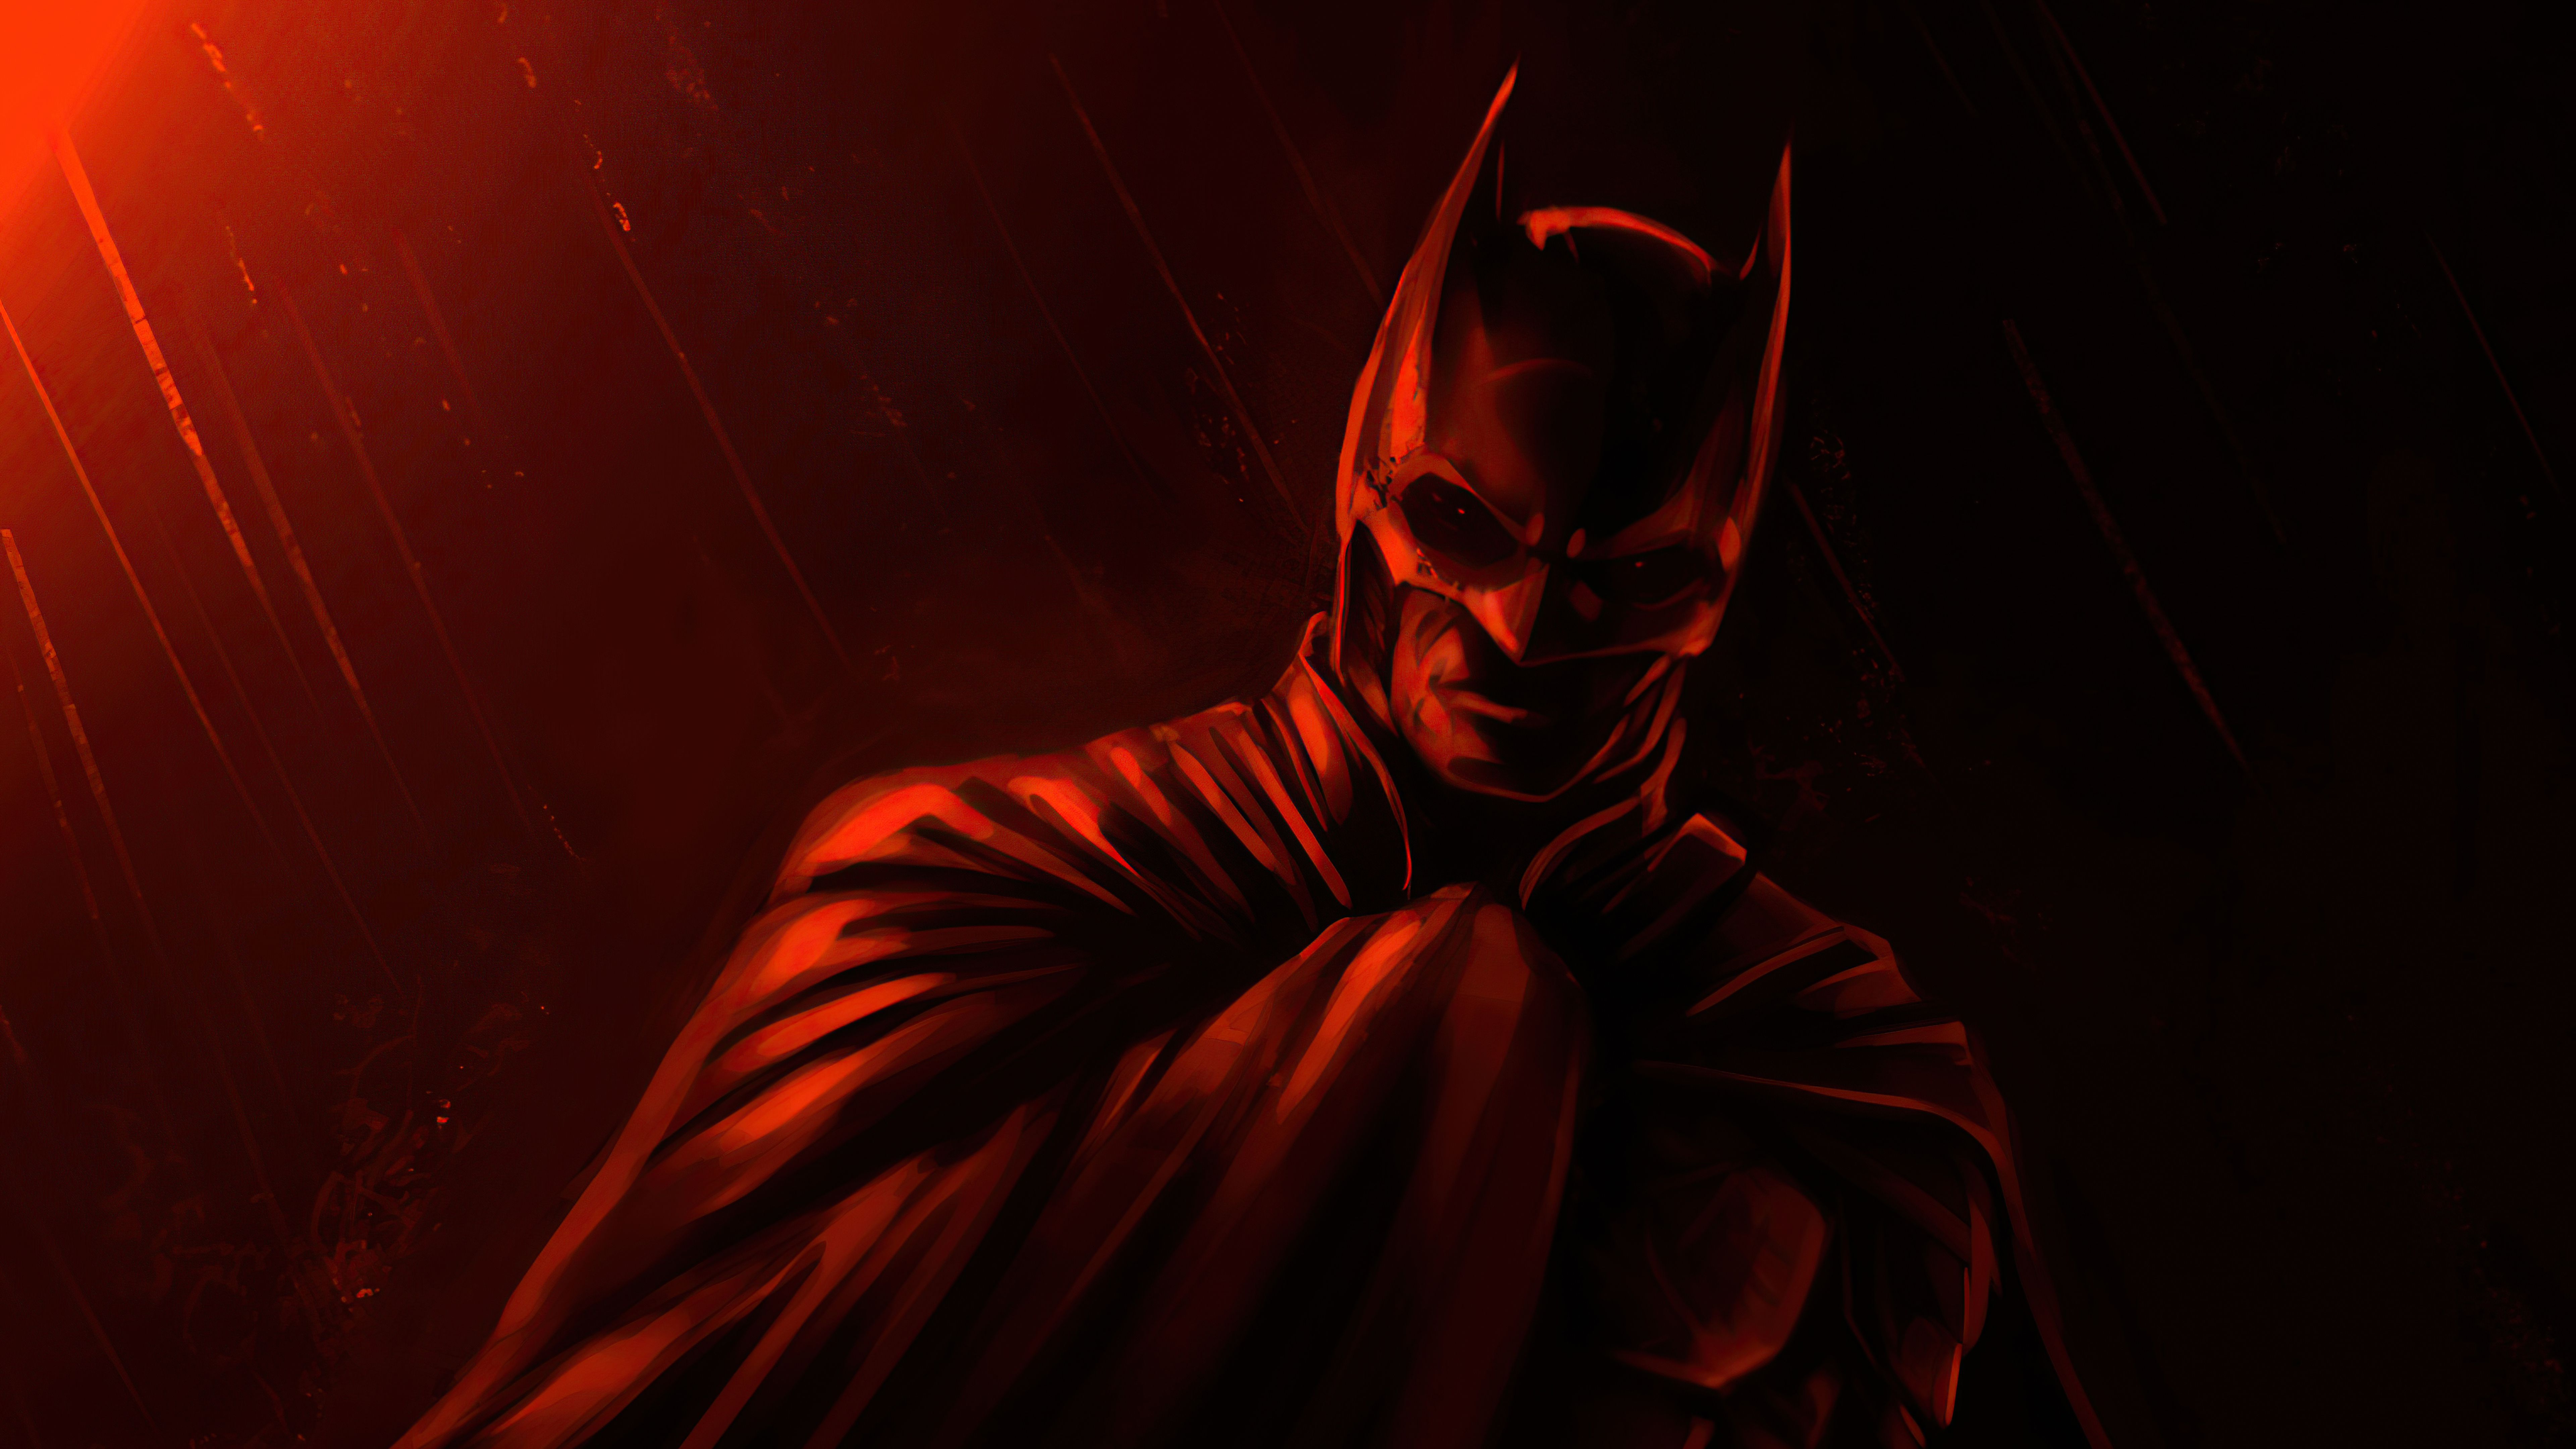 Batman wallpapers for desktop, download free Batman pictures and backgrounds  for PC